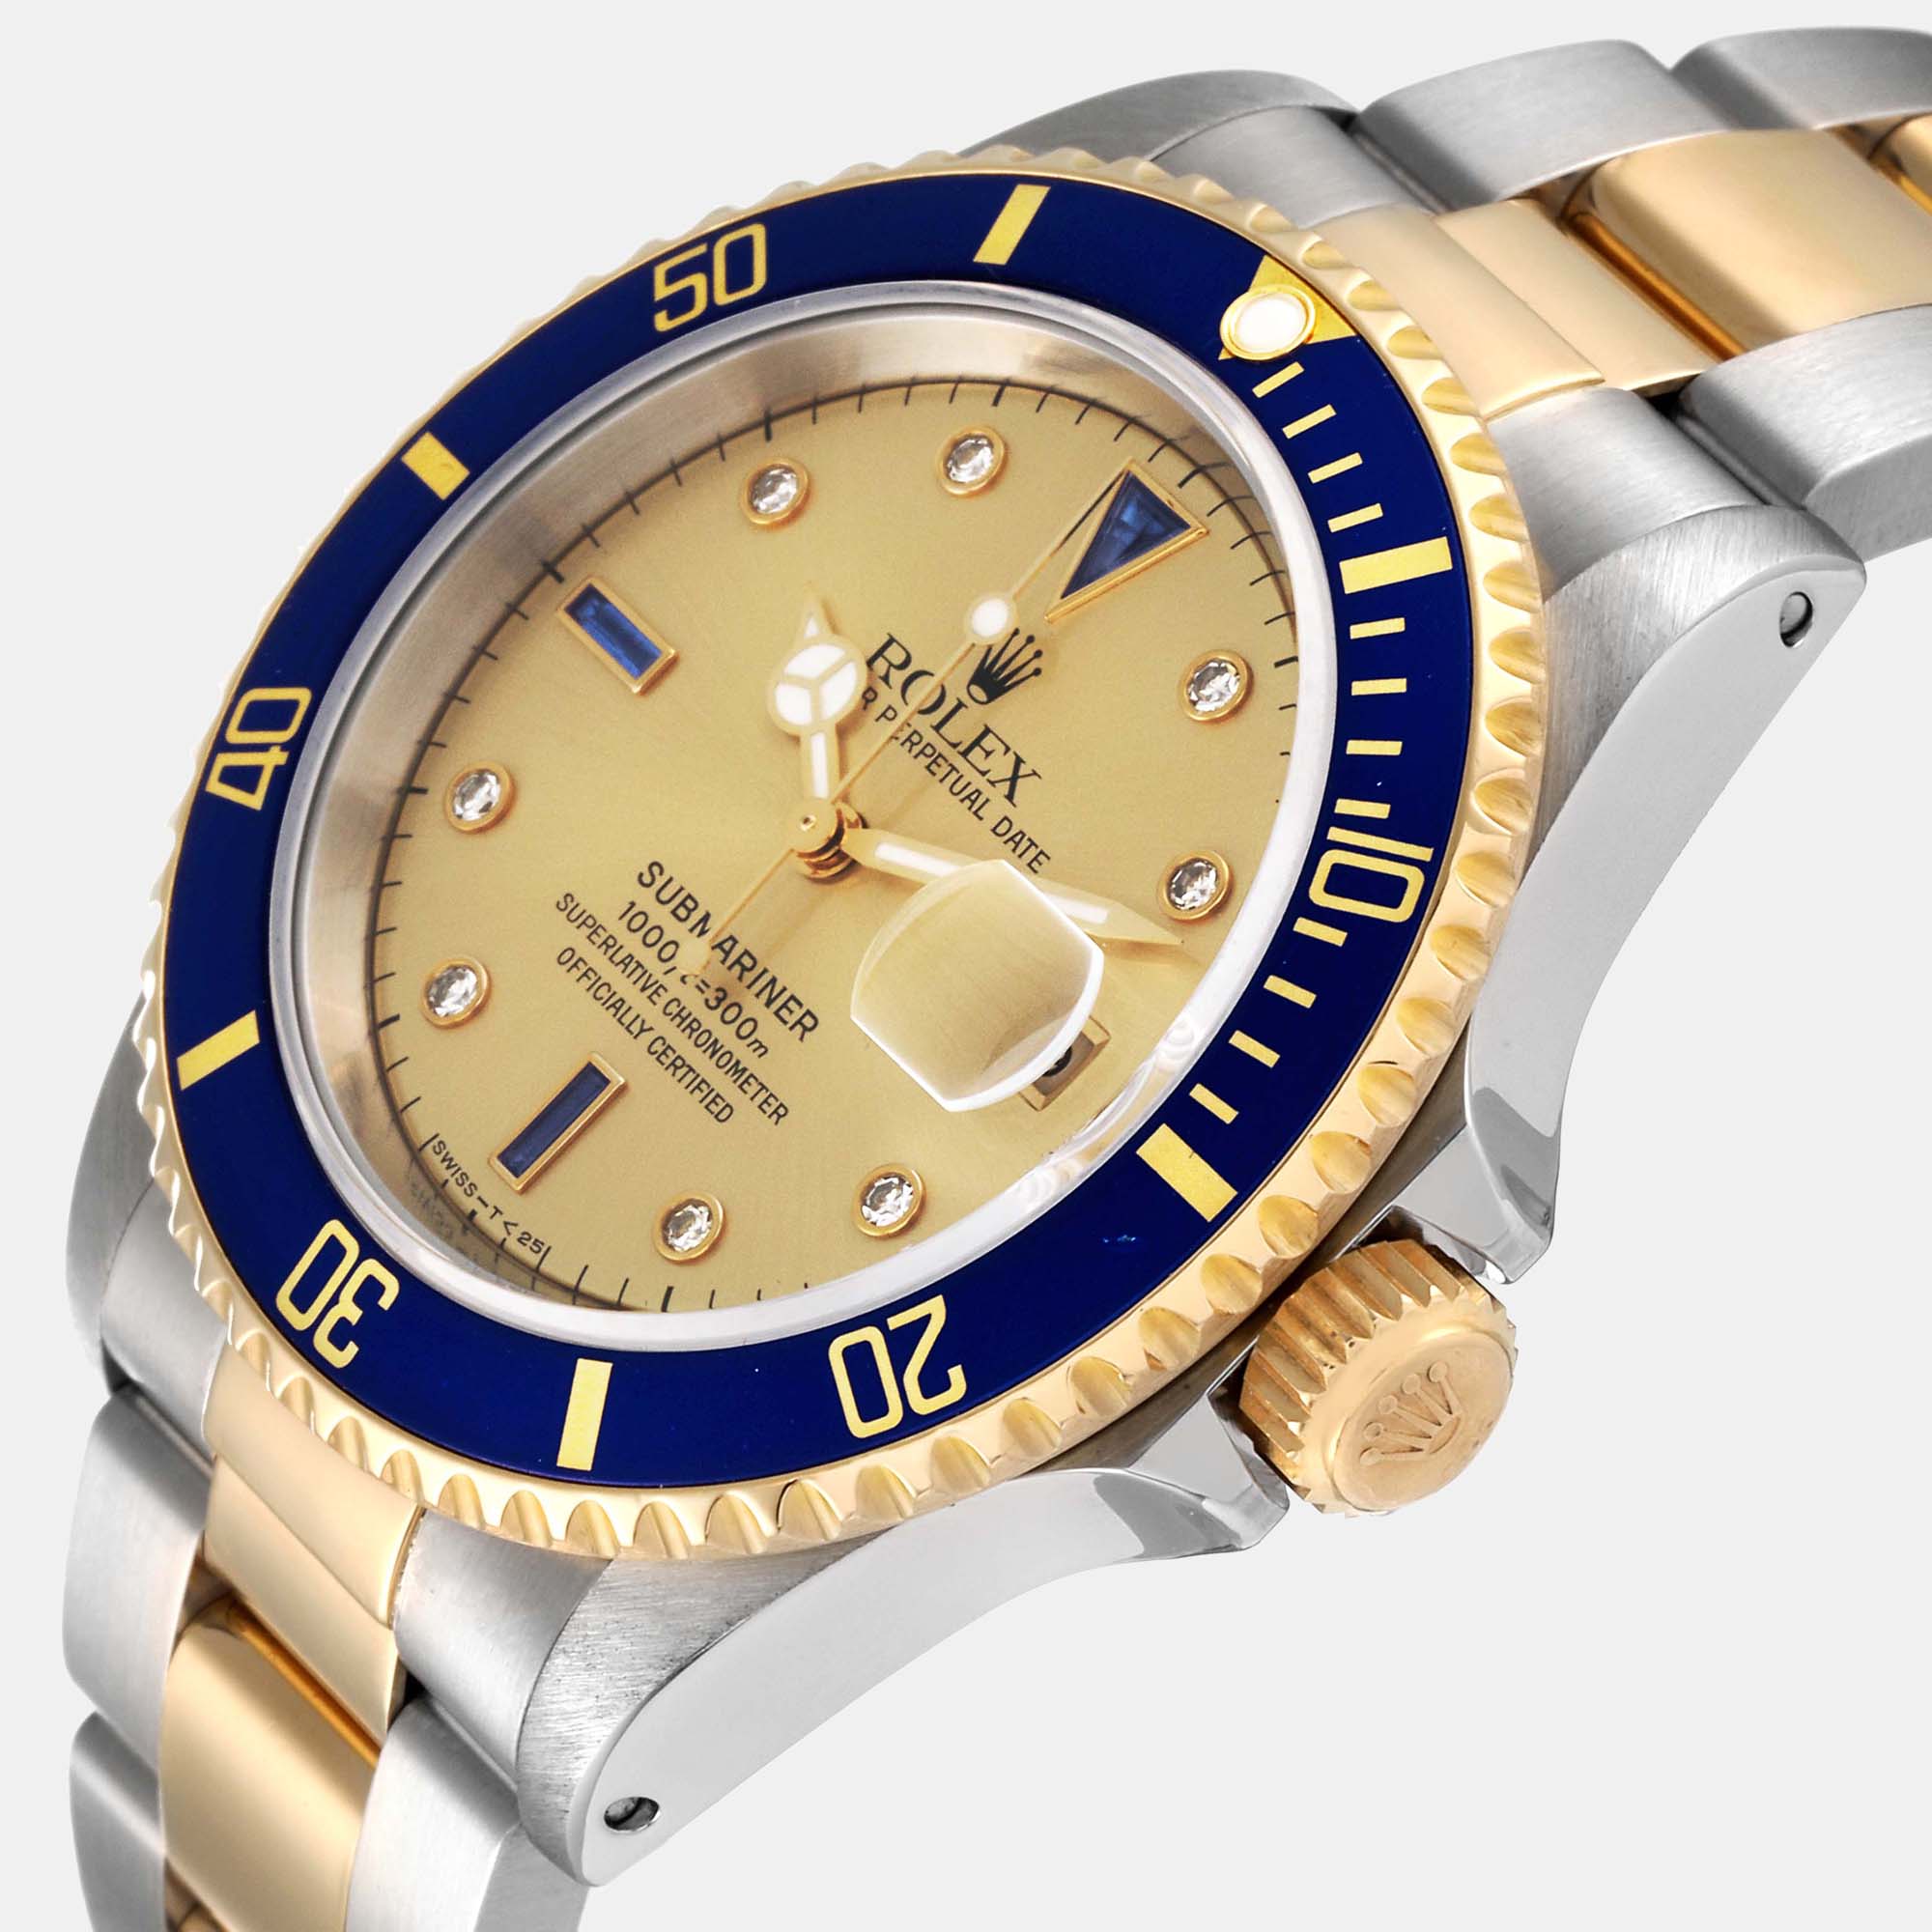 

Rolex Champagne Diamonds 18K Yellow Gold And Stainless Steel Submariner 16613 Men's Wristwatch 40 mm